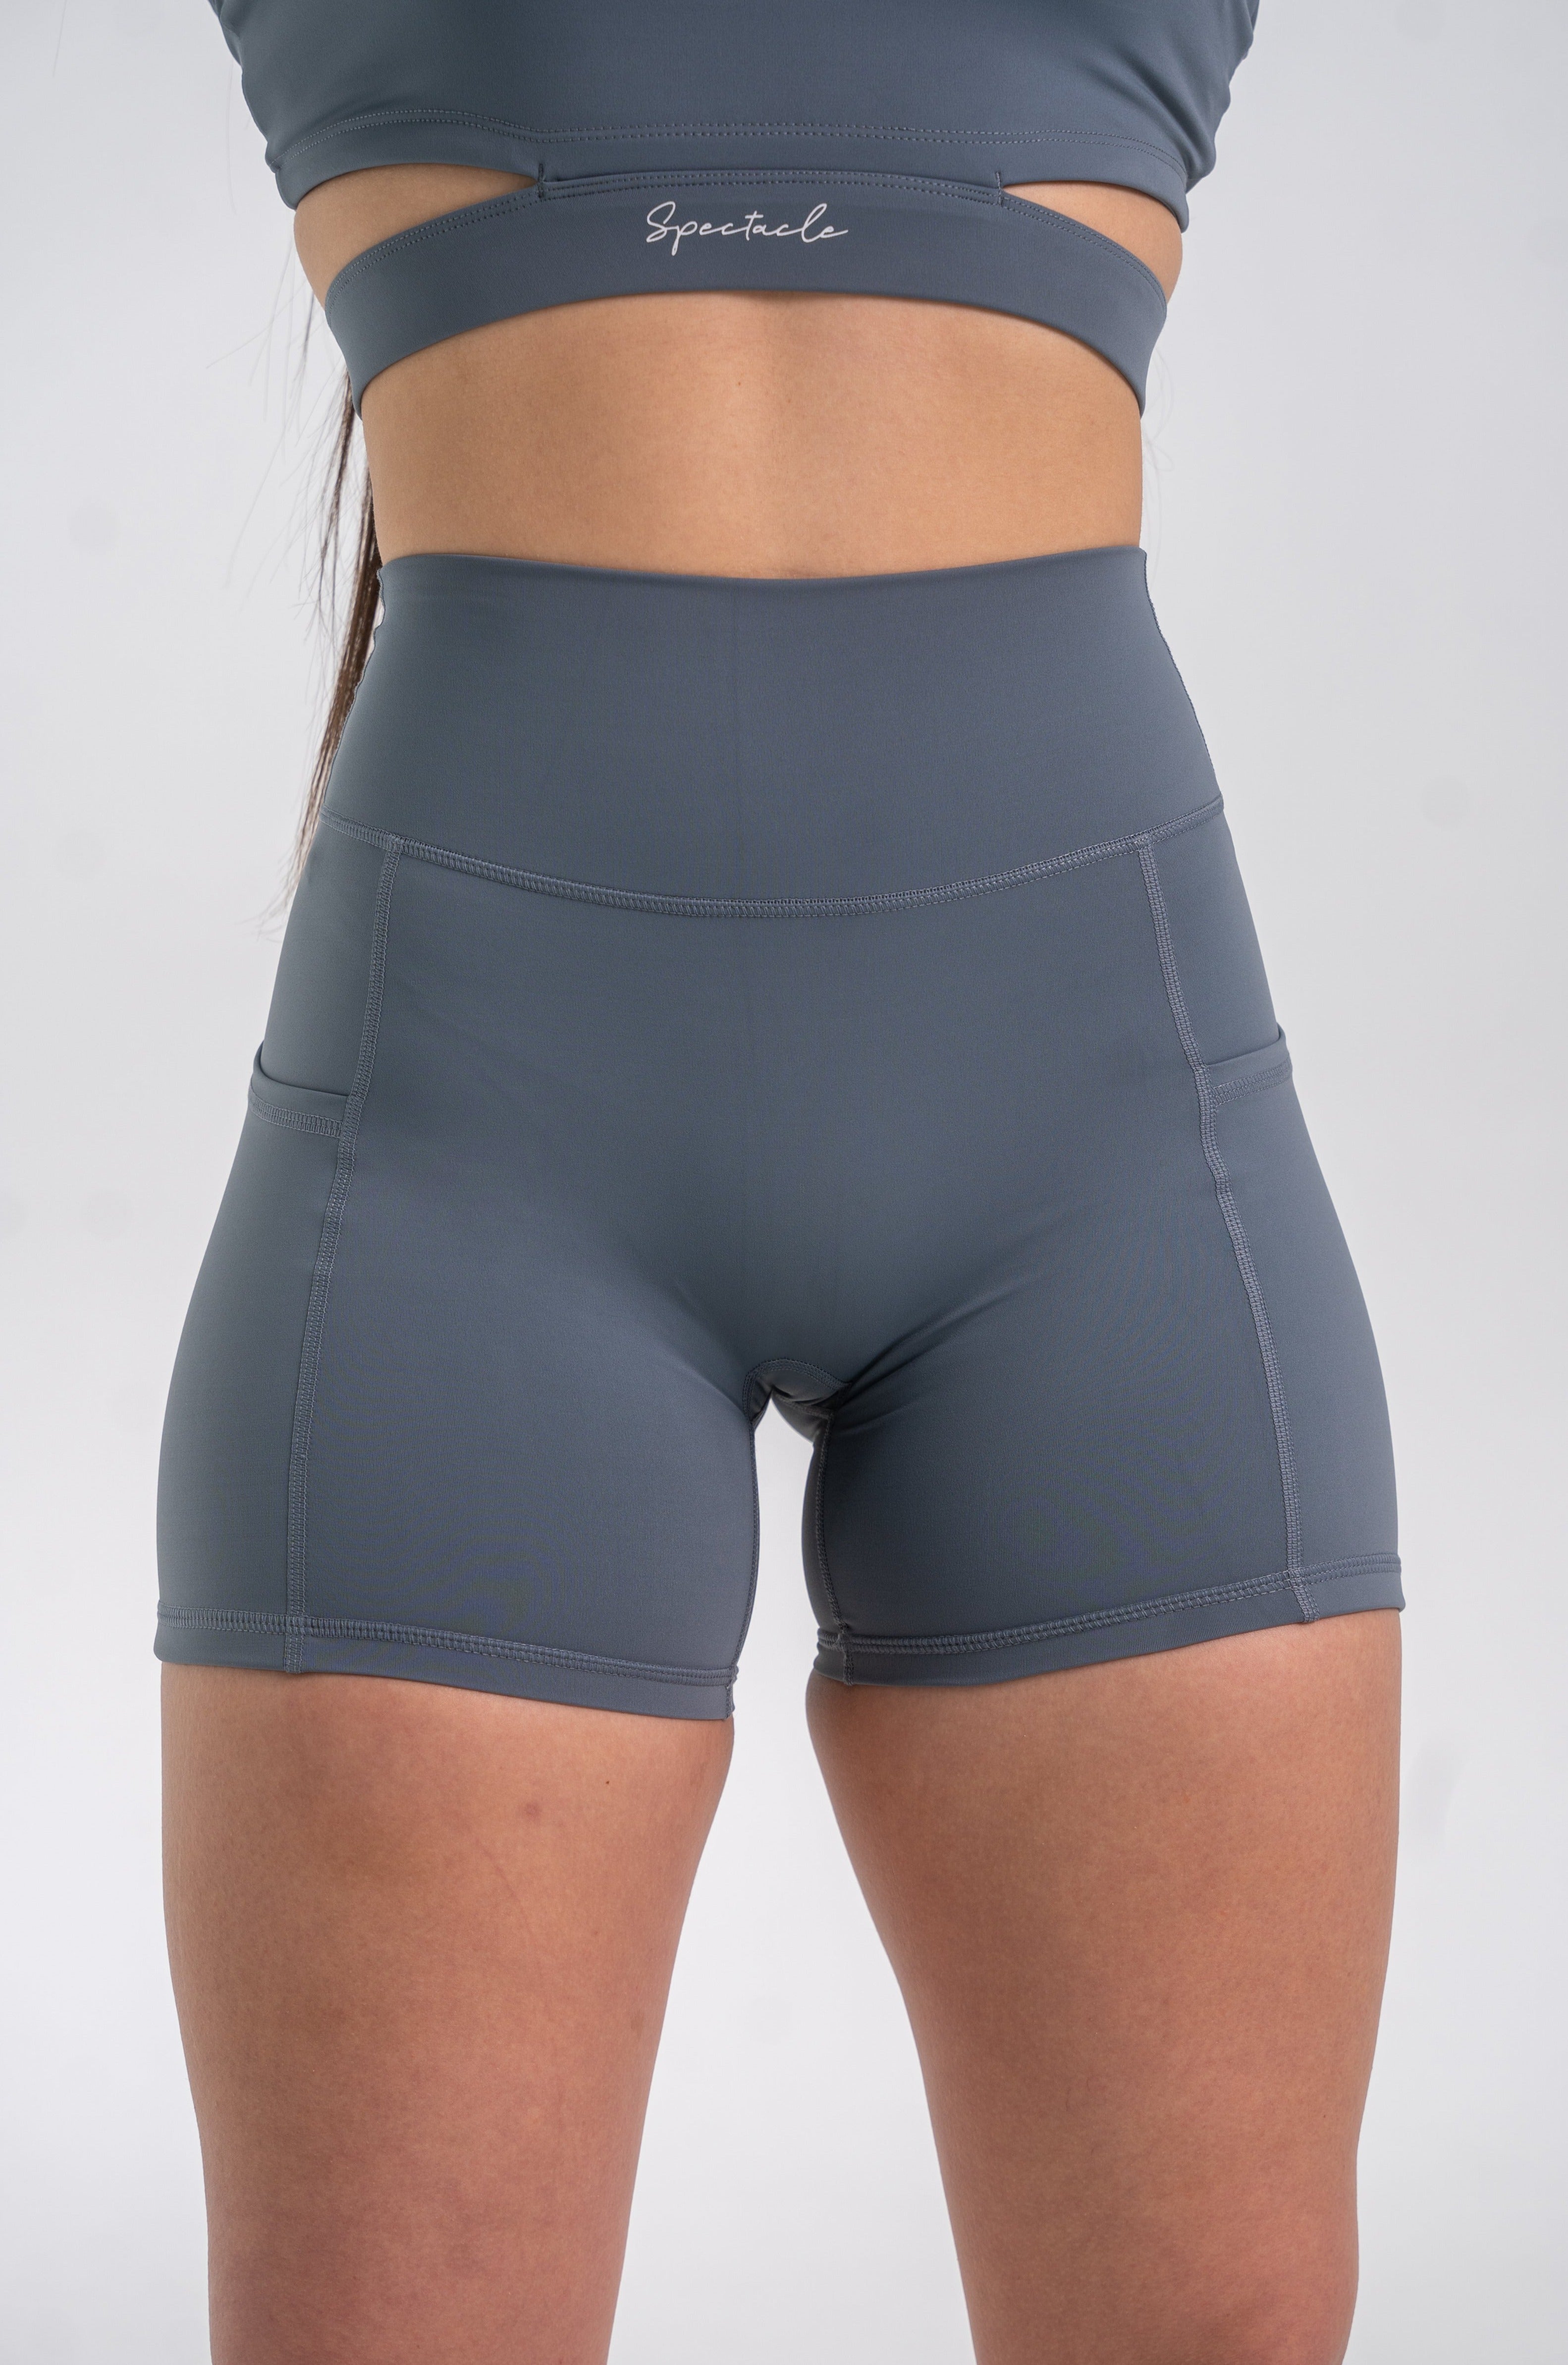 Spectacle Shorts - GUFIT